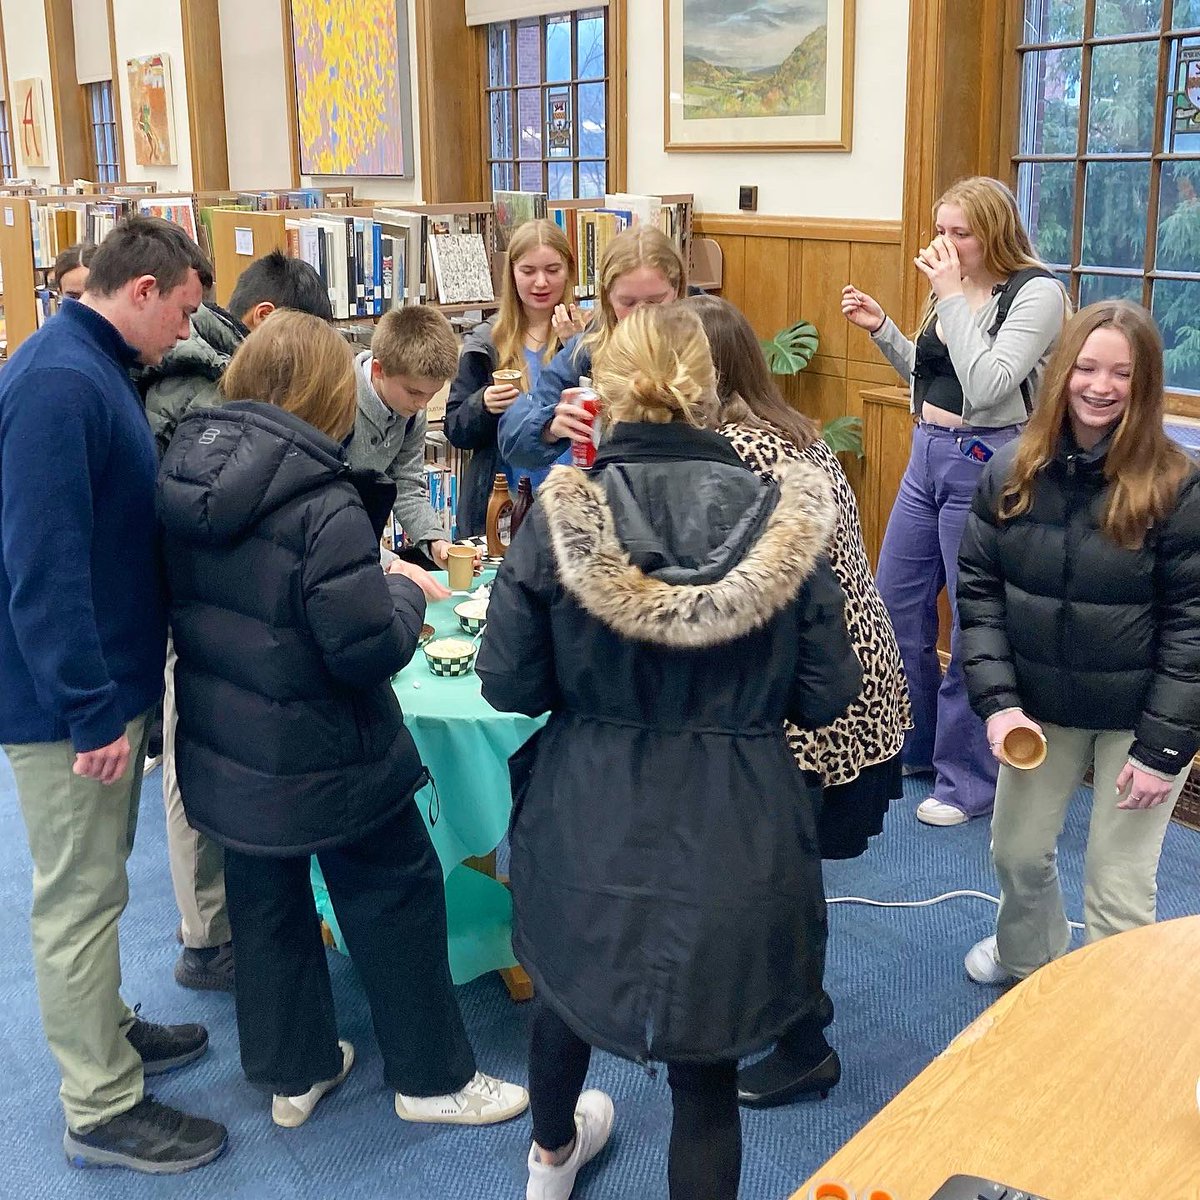 The hot cocoa bar in the library was a hit! Keep your eyes out for our next events in the coming weeks! ☕️🍫 #hotchocolate #hotcocoa #hotcocoabar #whippedcream #sprinkles #marshmallow #chocolate #library #libraryprogram #libraryevents